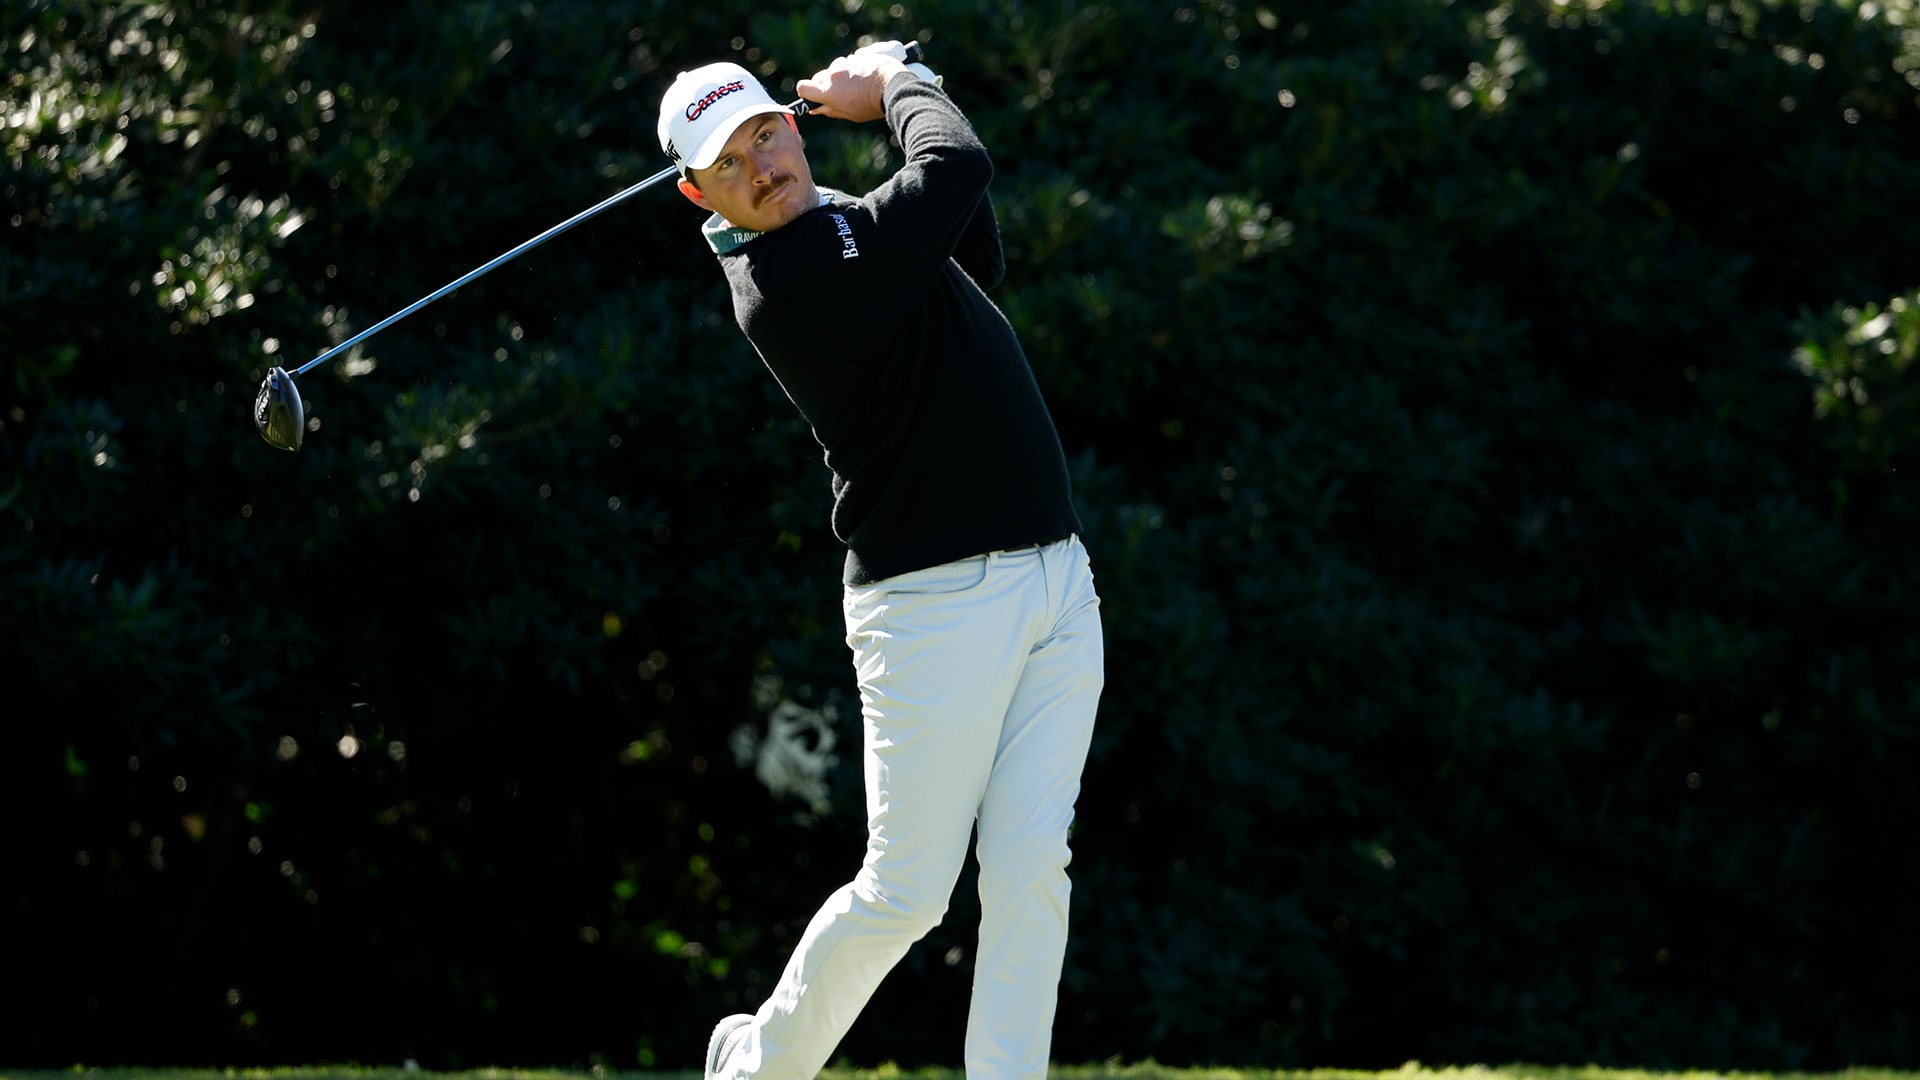 Joel Dahmen in contention at RSM, uses fear of losing PGA Tour card as motivation